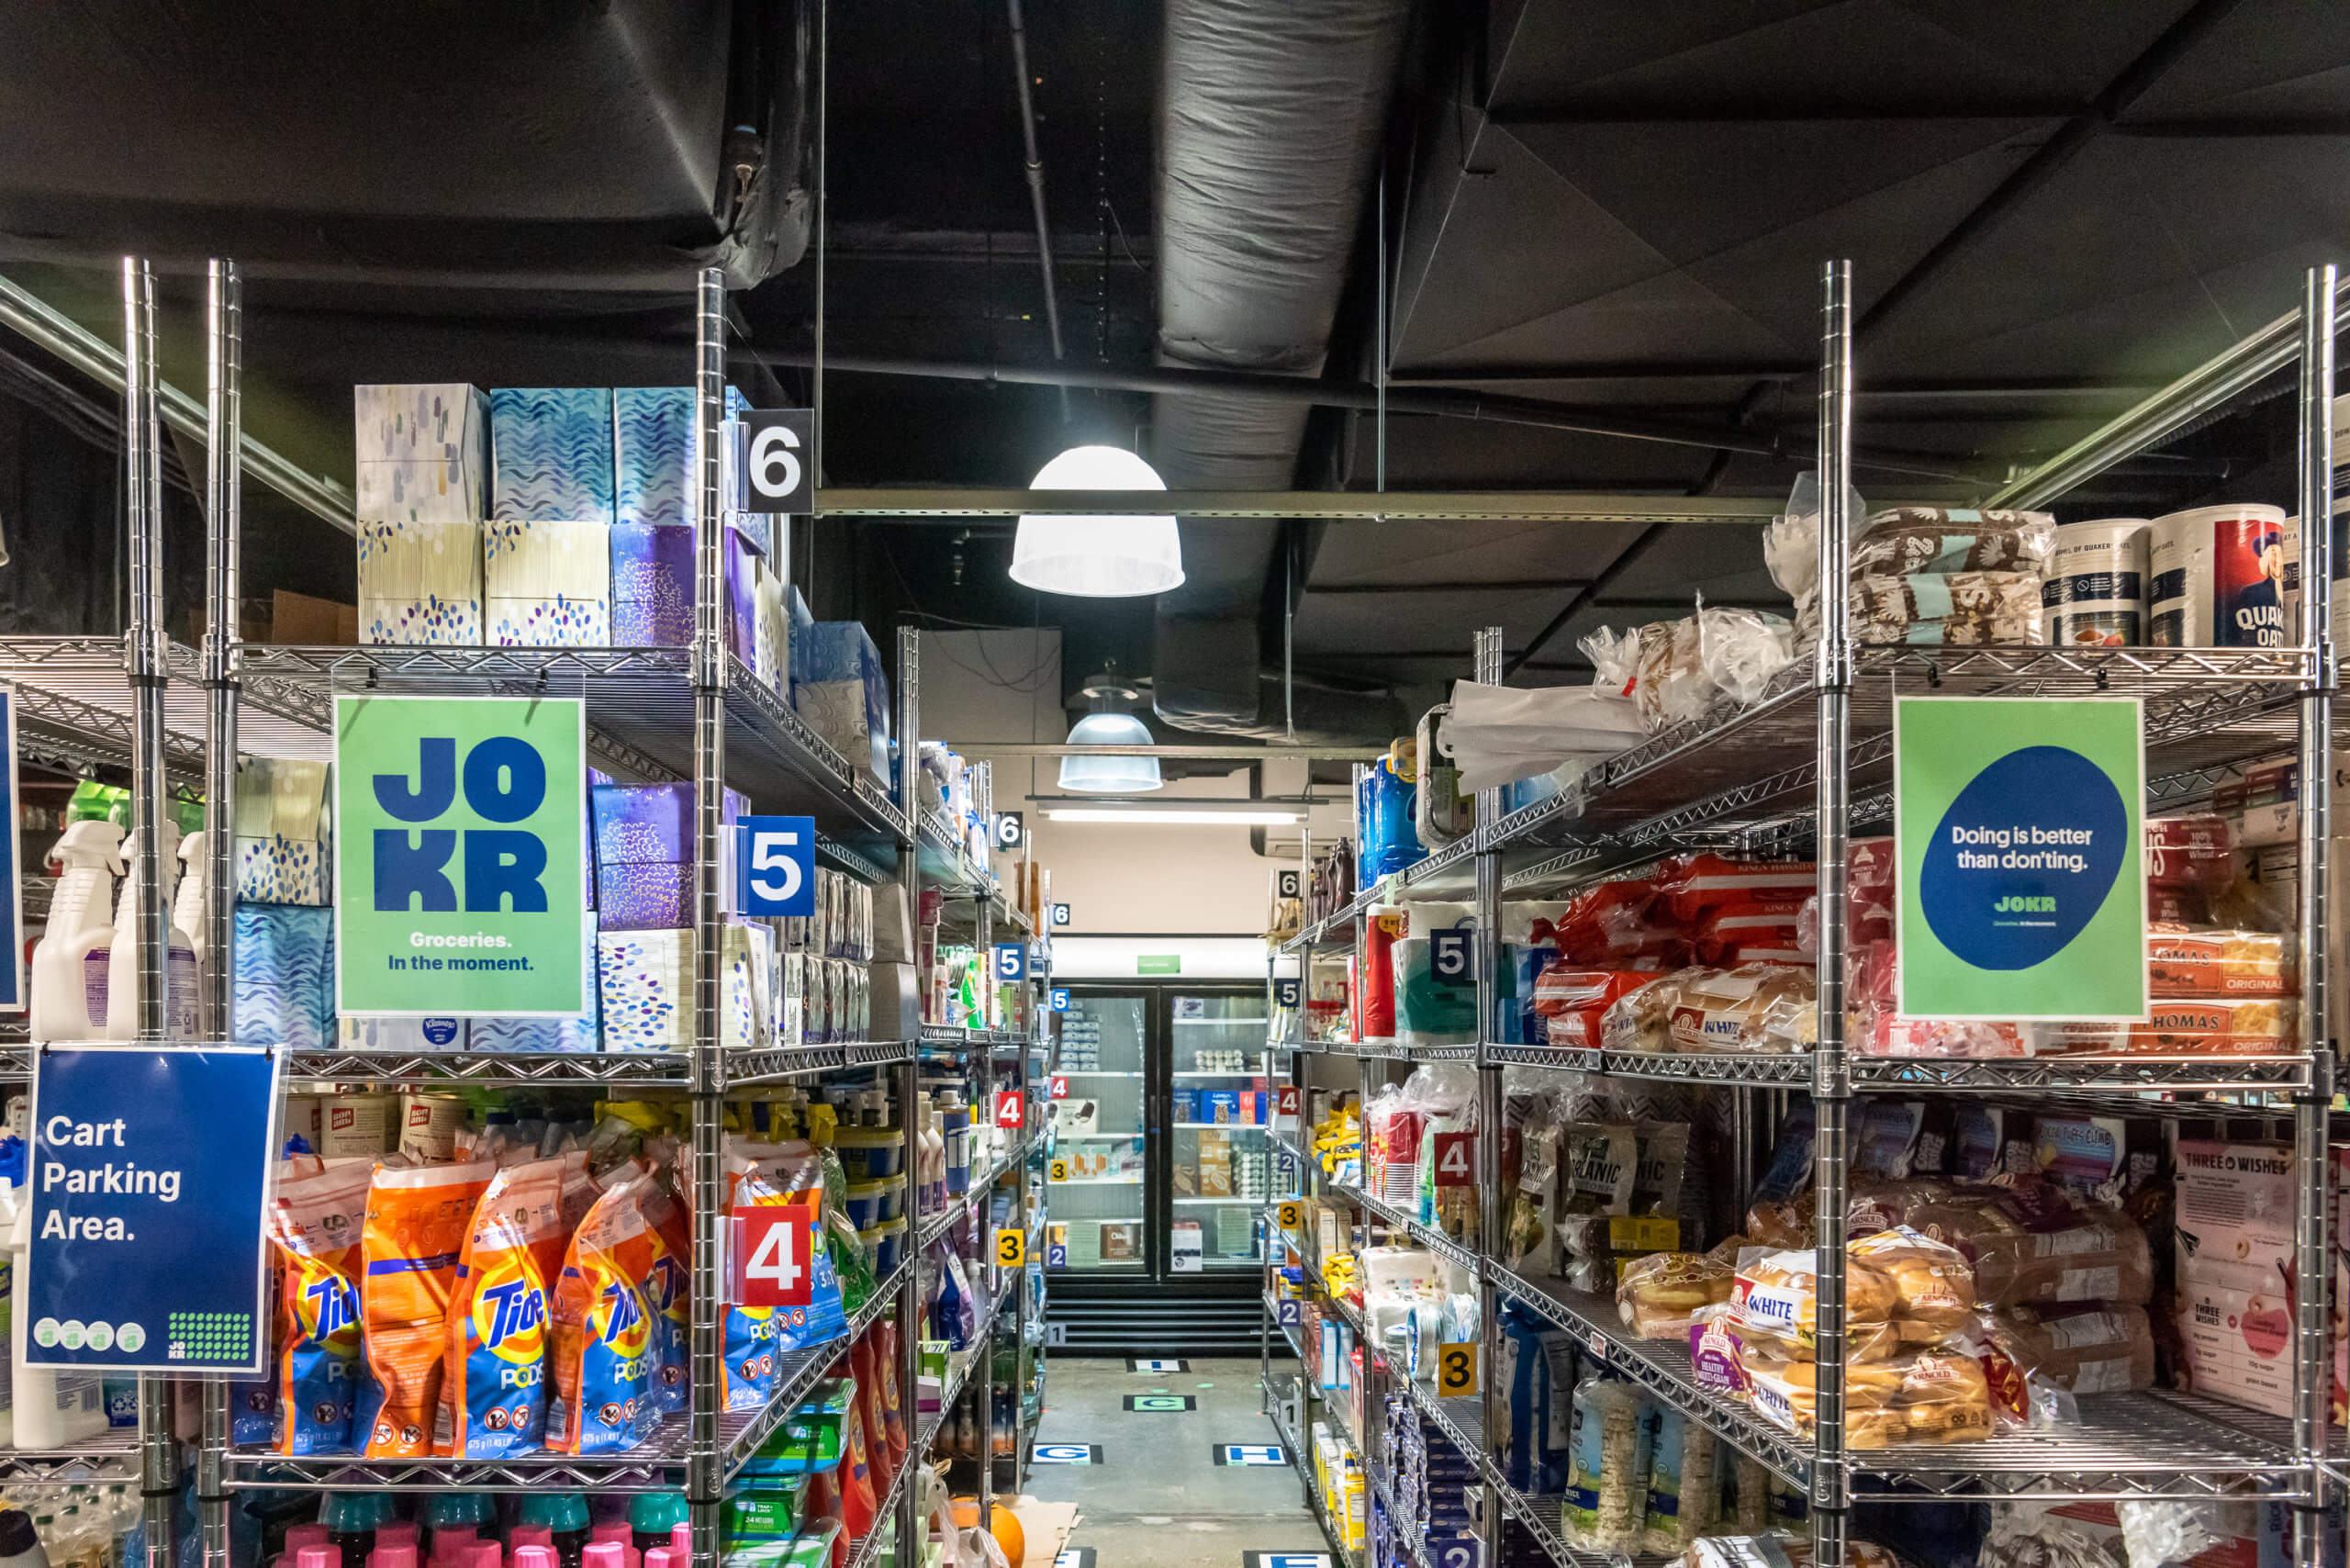 a jokr dark shop that bodega owners want regulated